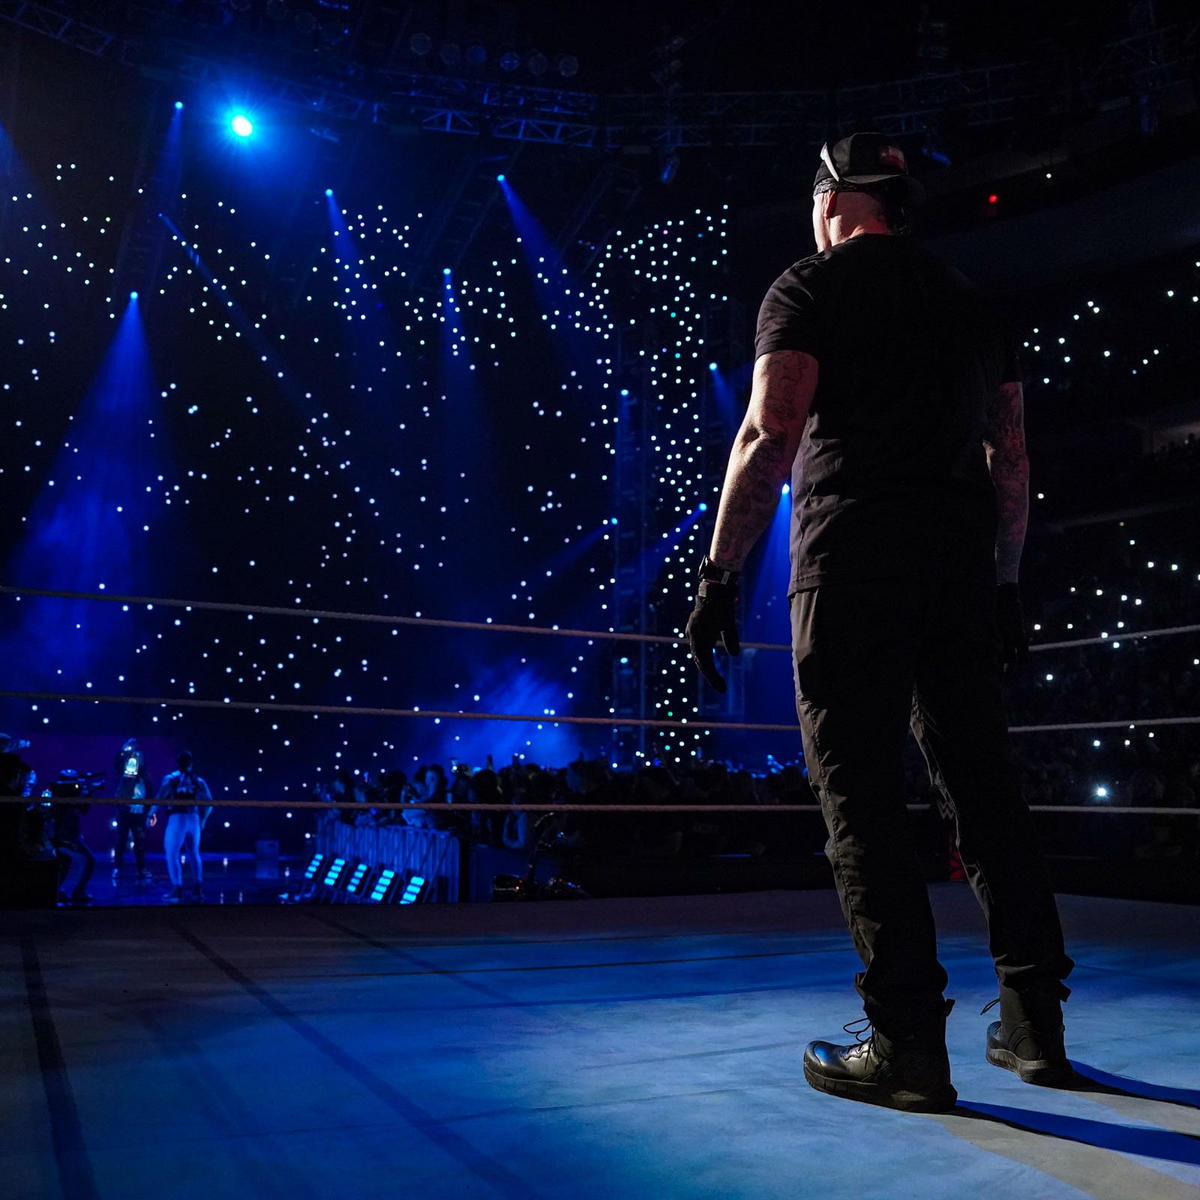 This shot right here defines wrestling. #Thankyoutaker